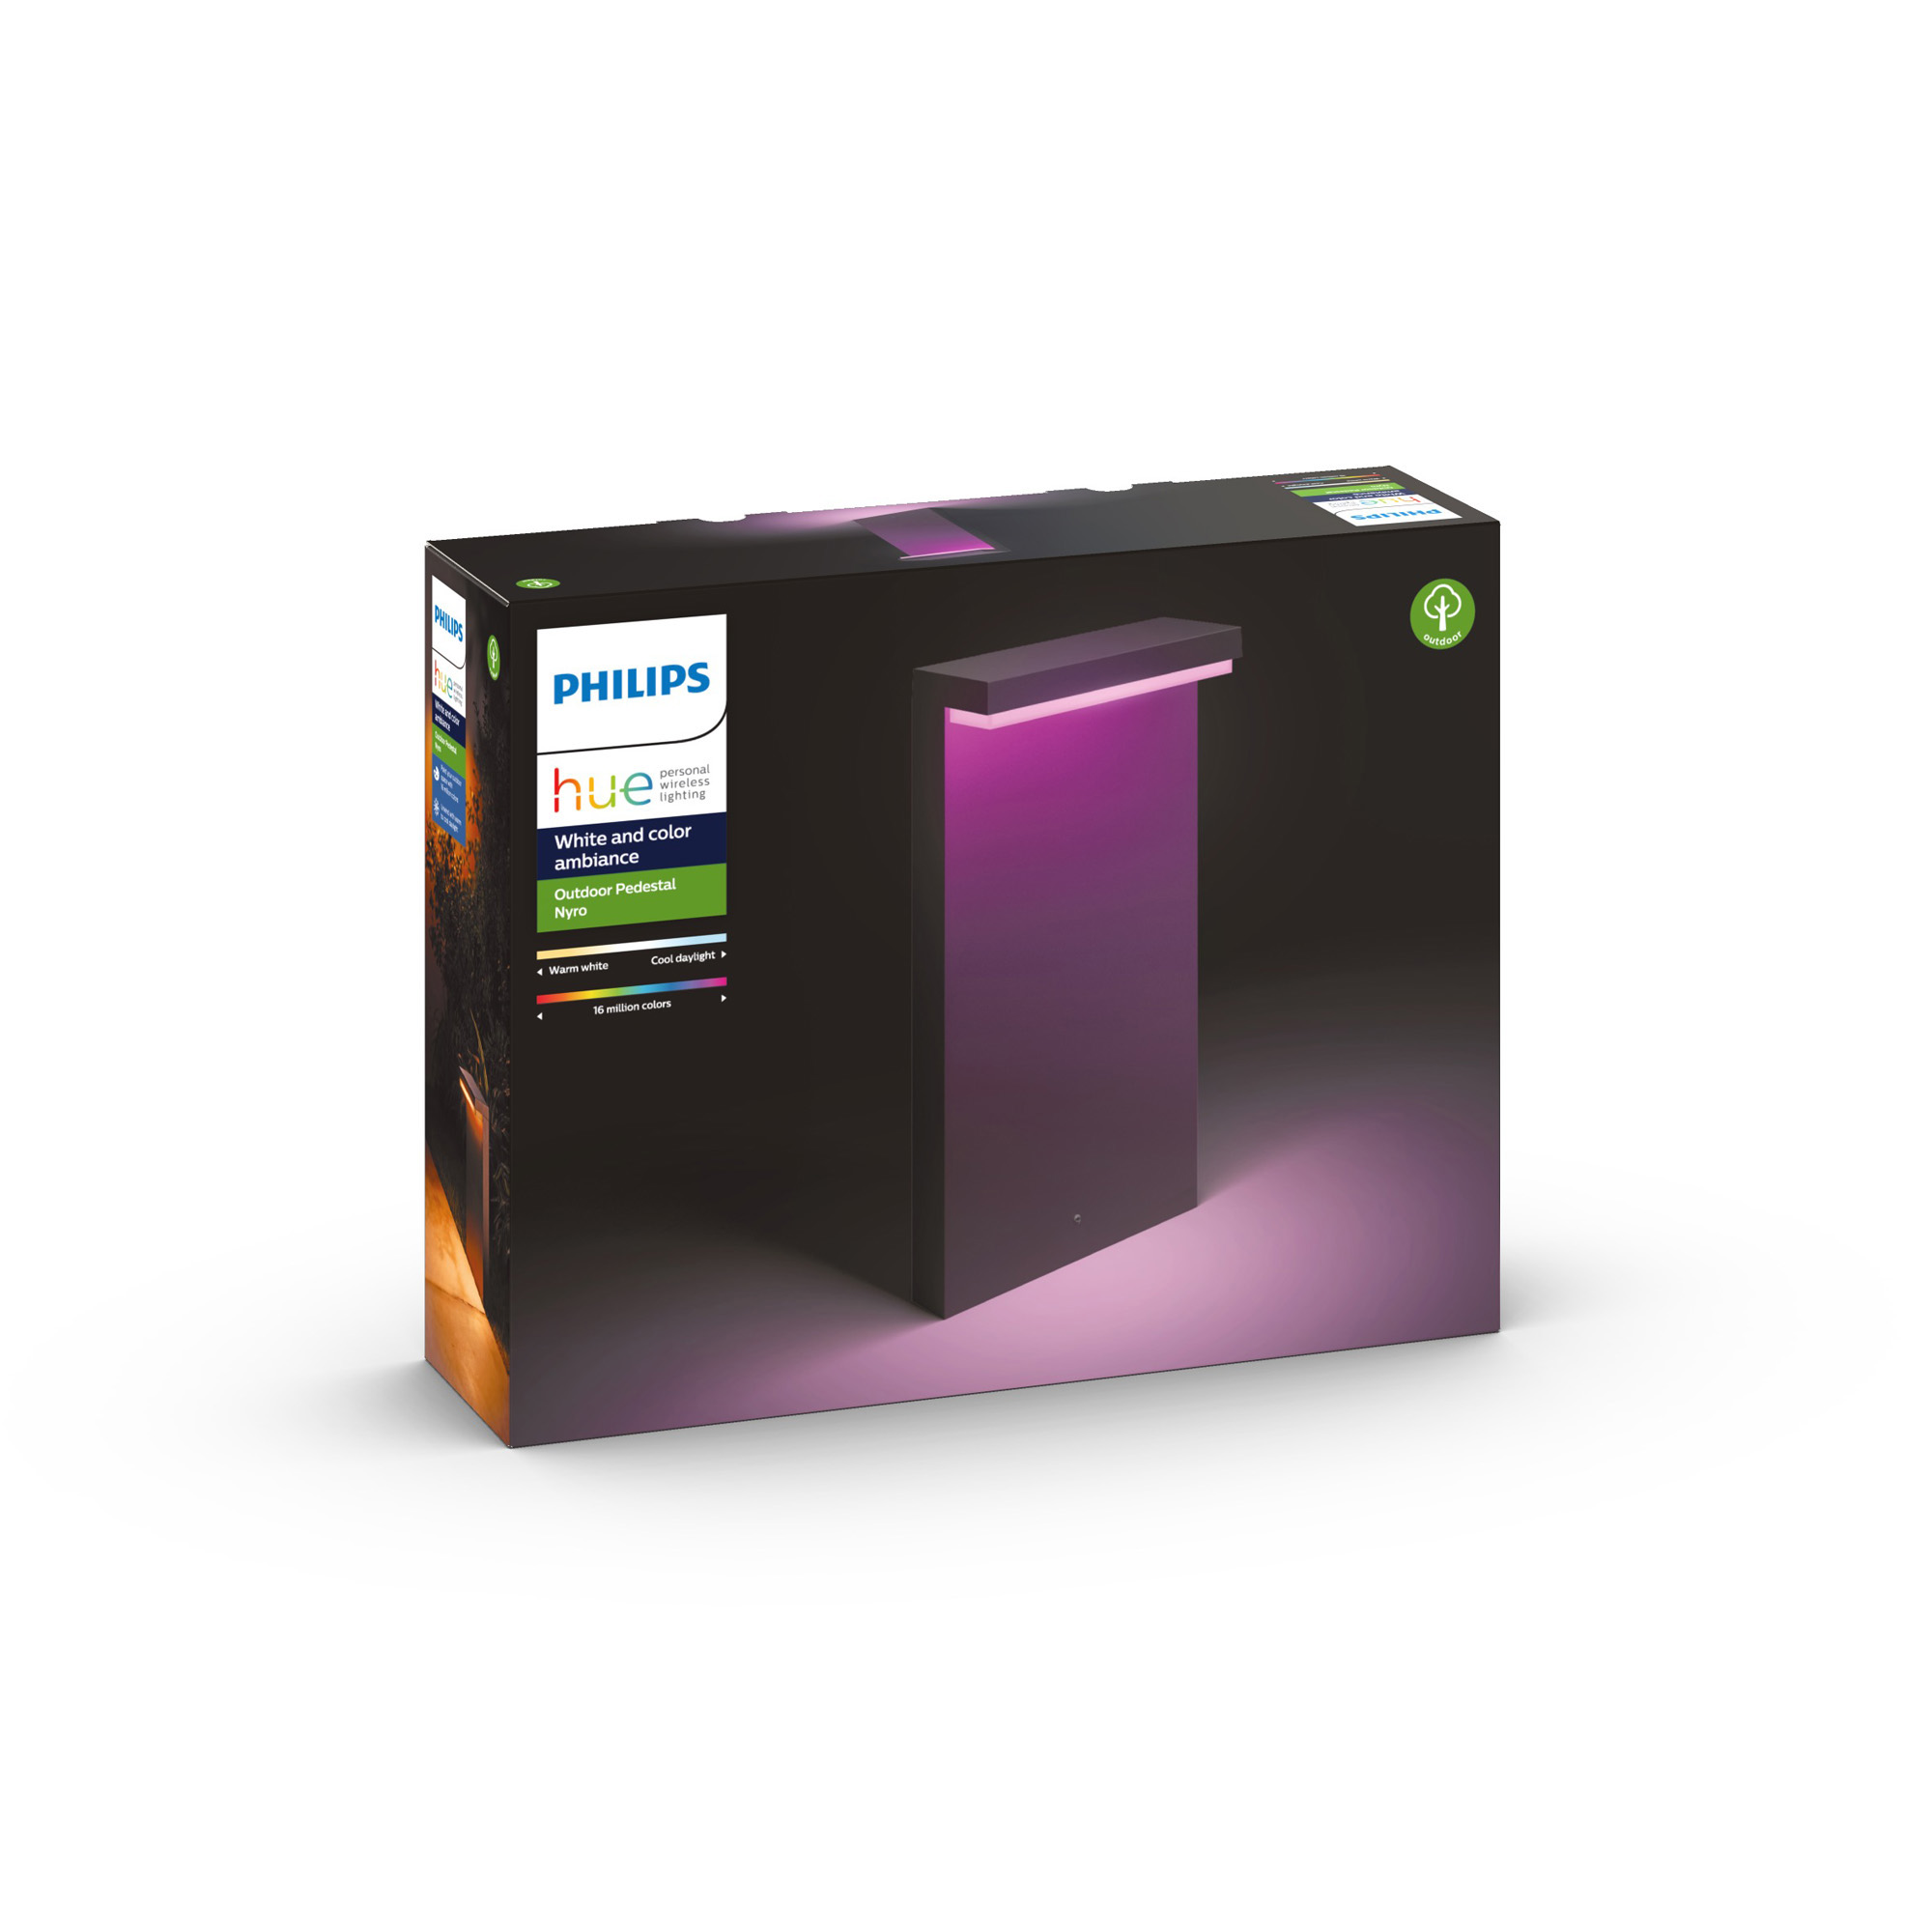 Philips Hue White and Color Ambiance LED Pedestal Light Nyro negru 1000lm